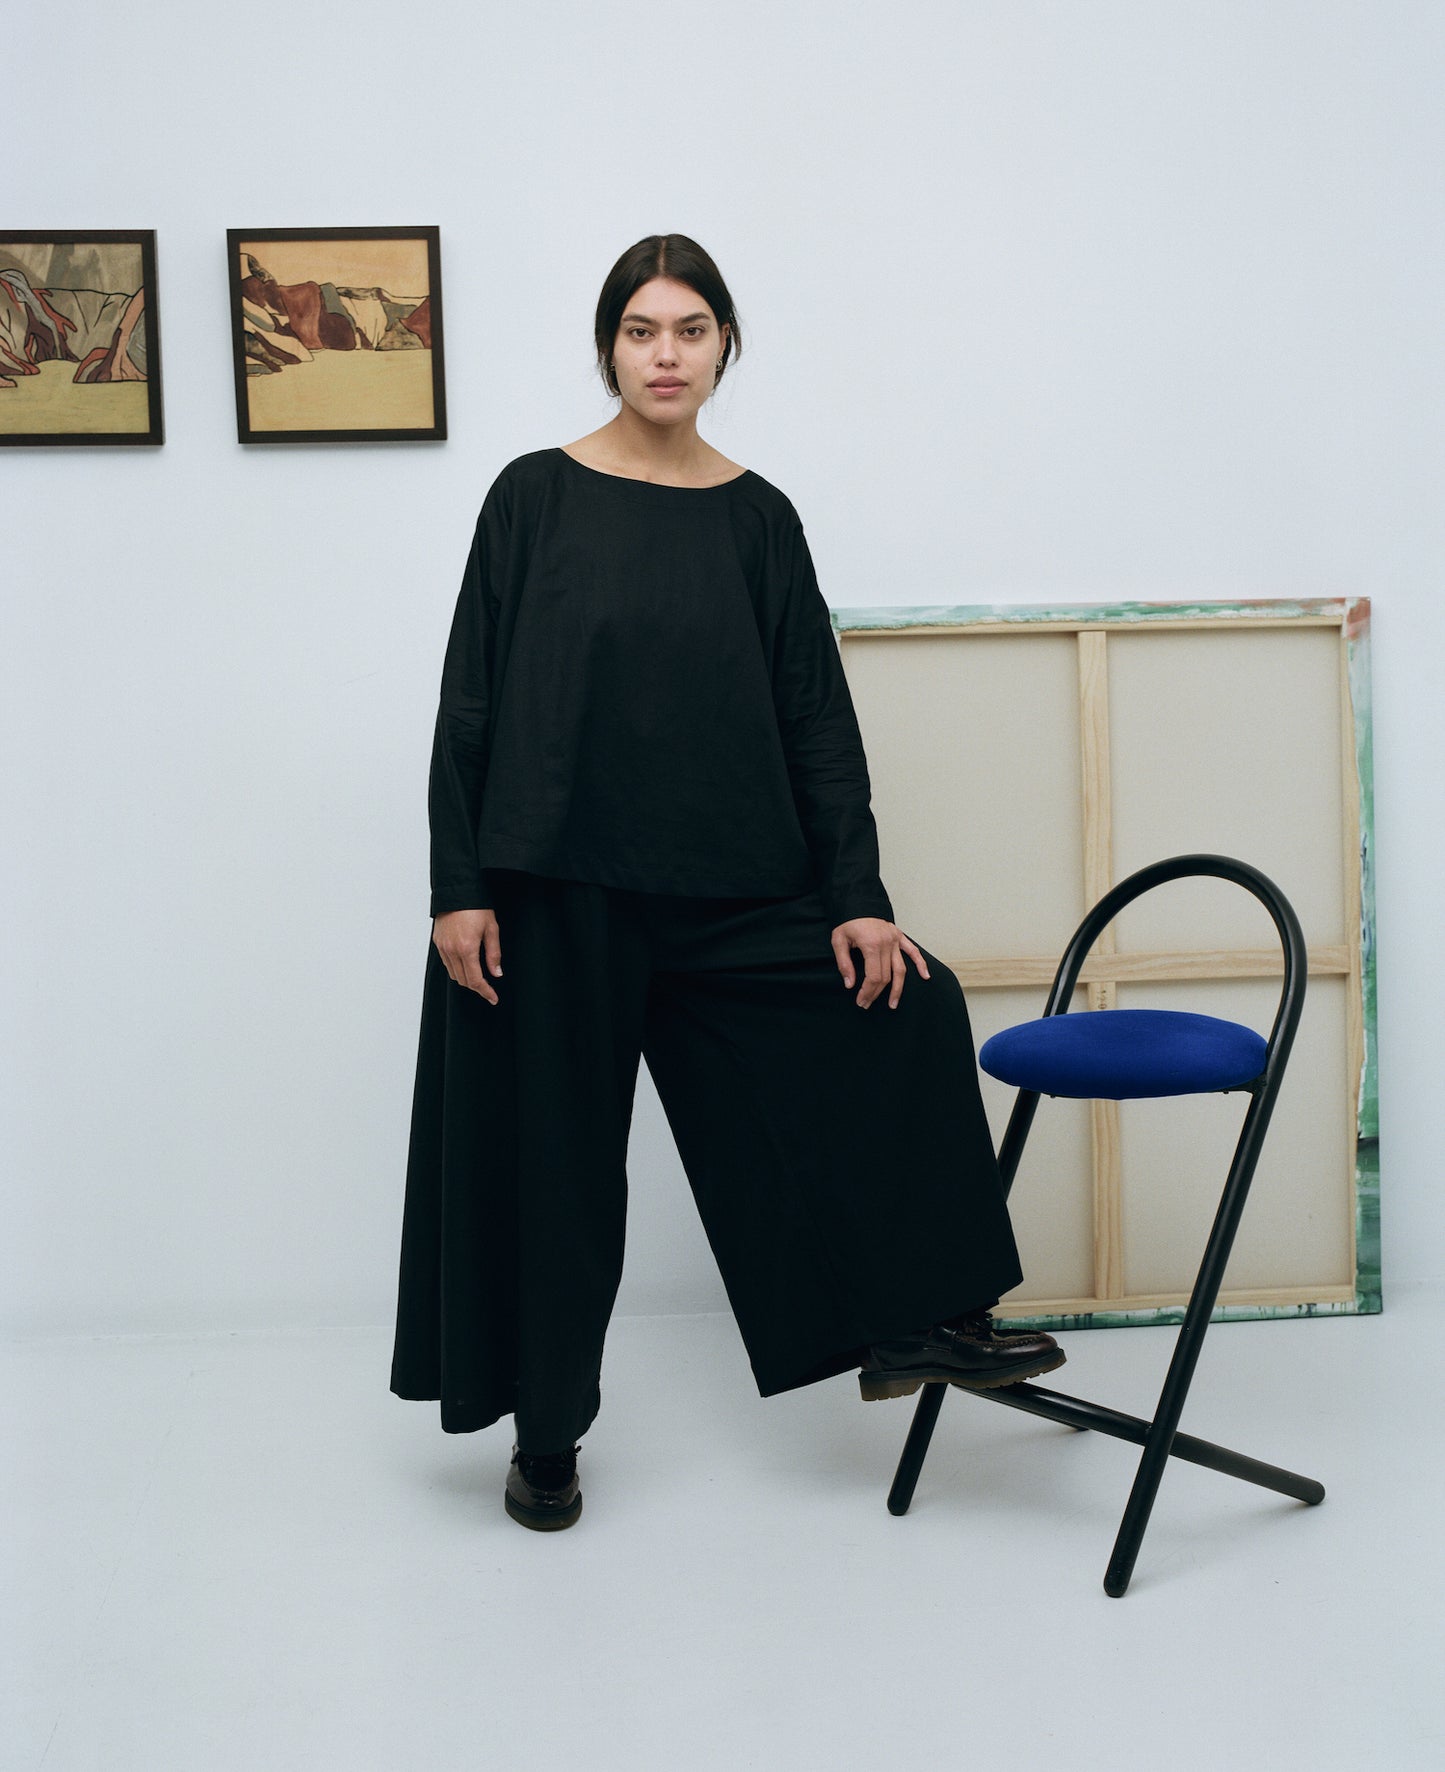 Karen wearing a black long sleeve linen cotton top with matching black linen cotton wide leg pants in an art gallery with foot on a stool